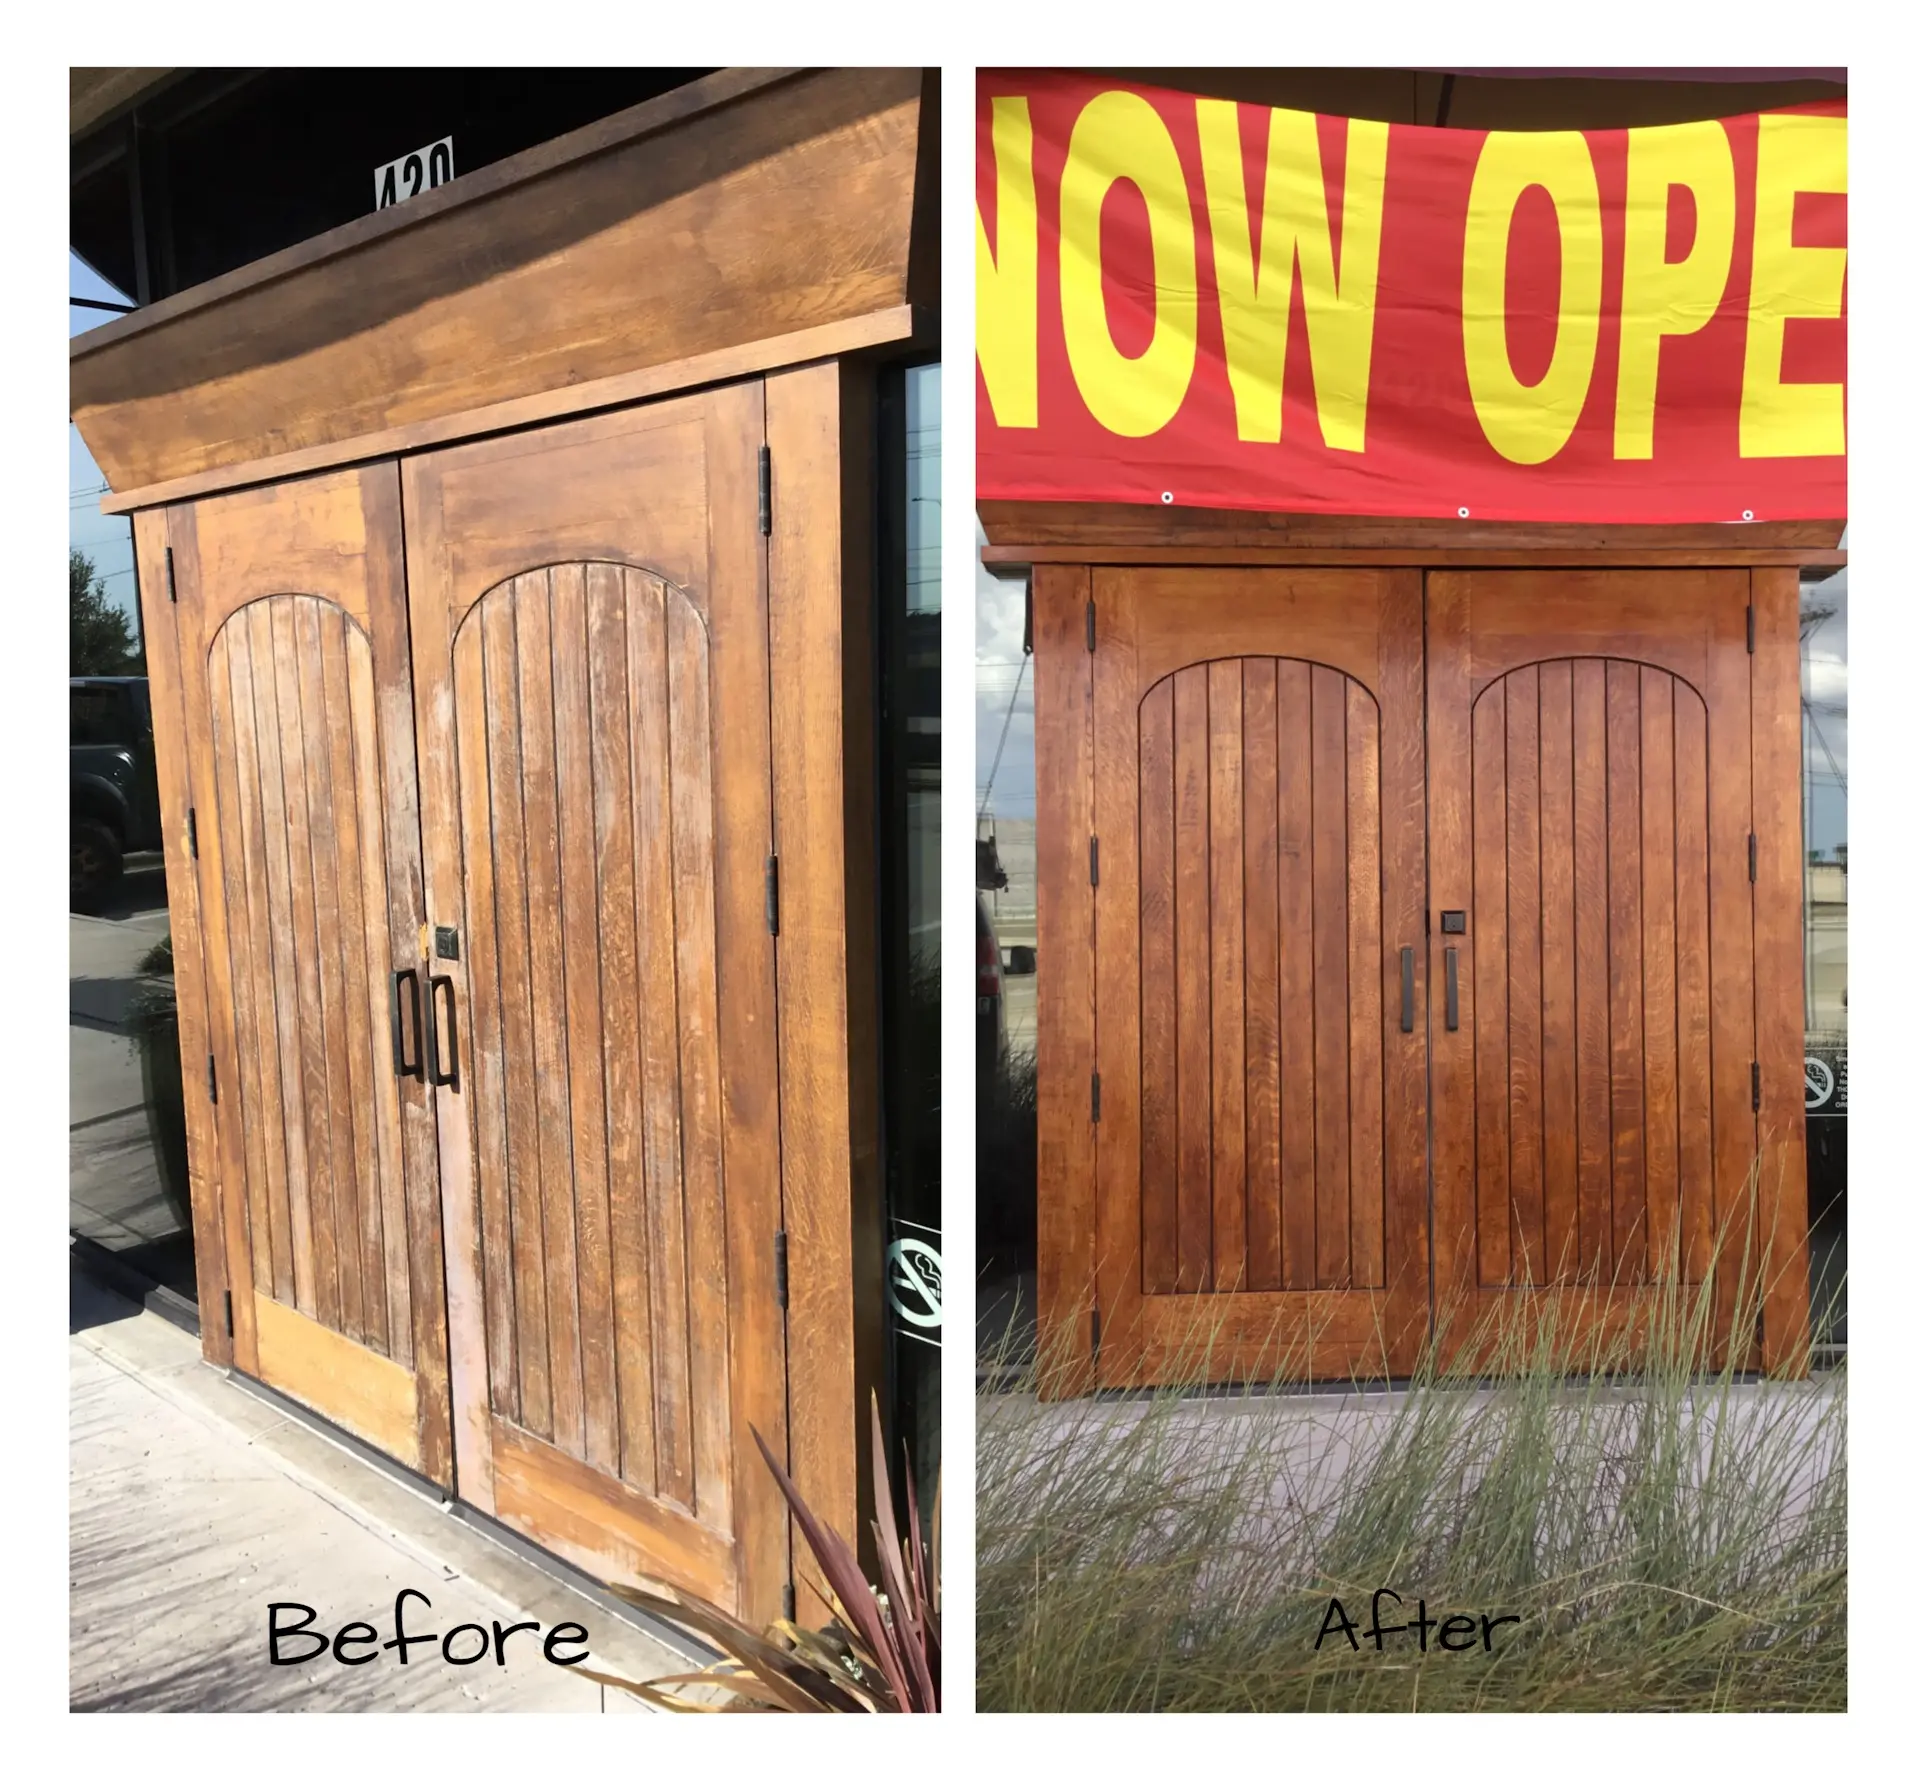 A set of two, old wooden doors at the front of a business before and after they have been refinished by Mr. Handyman.